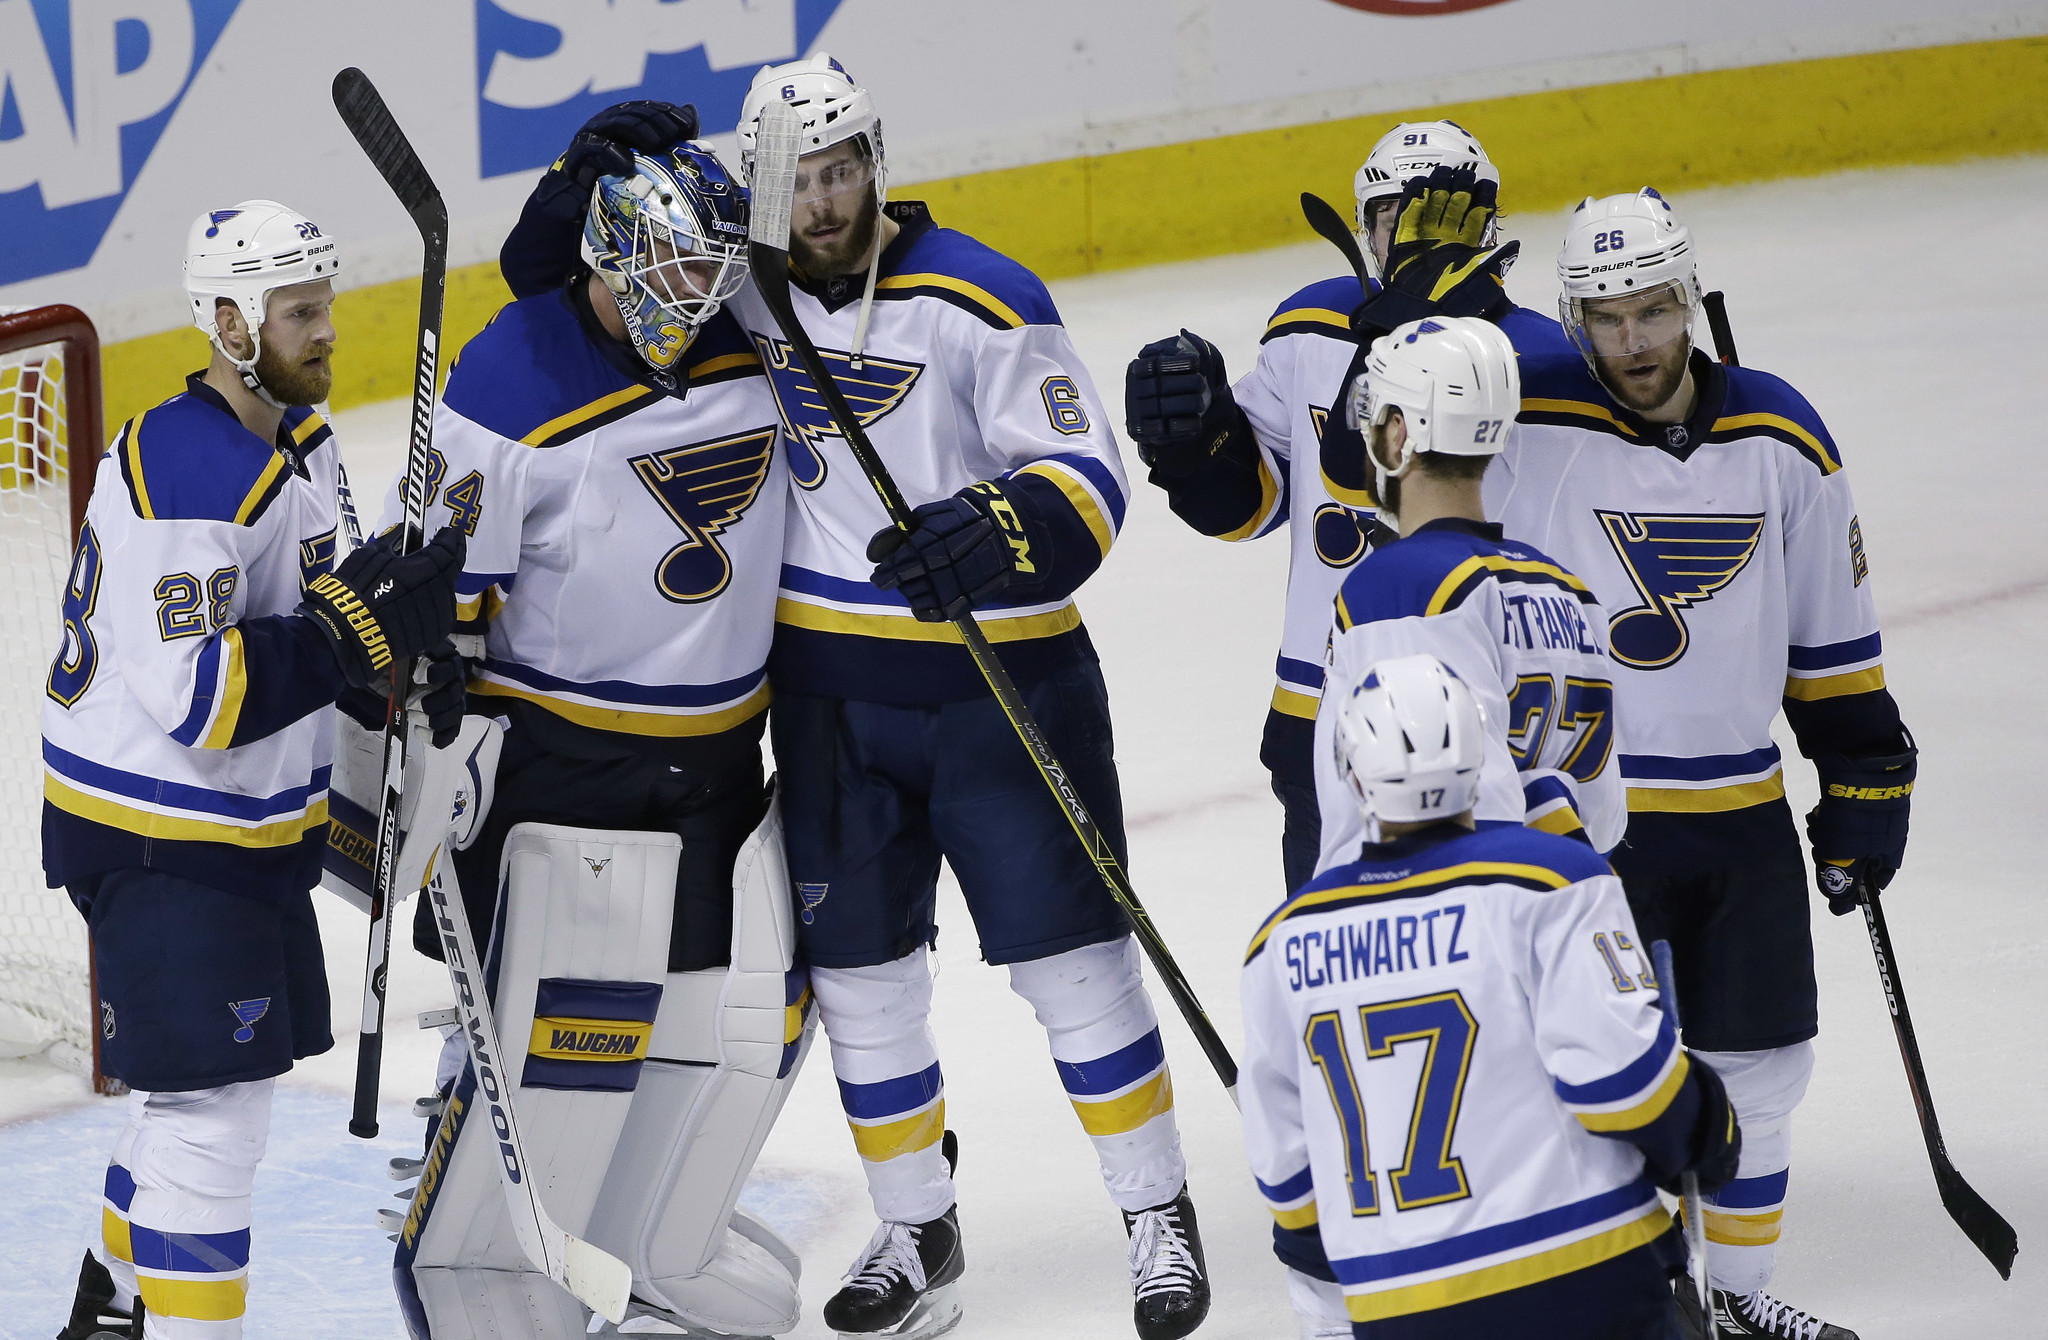 Blues beat Sharks 6-3 to even series at two games apiece - Chicago Tribune